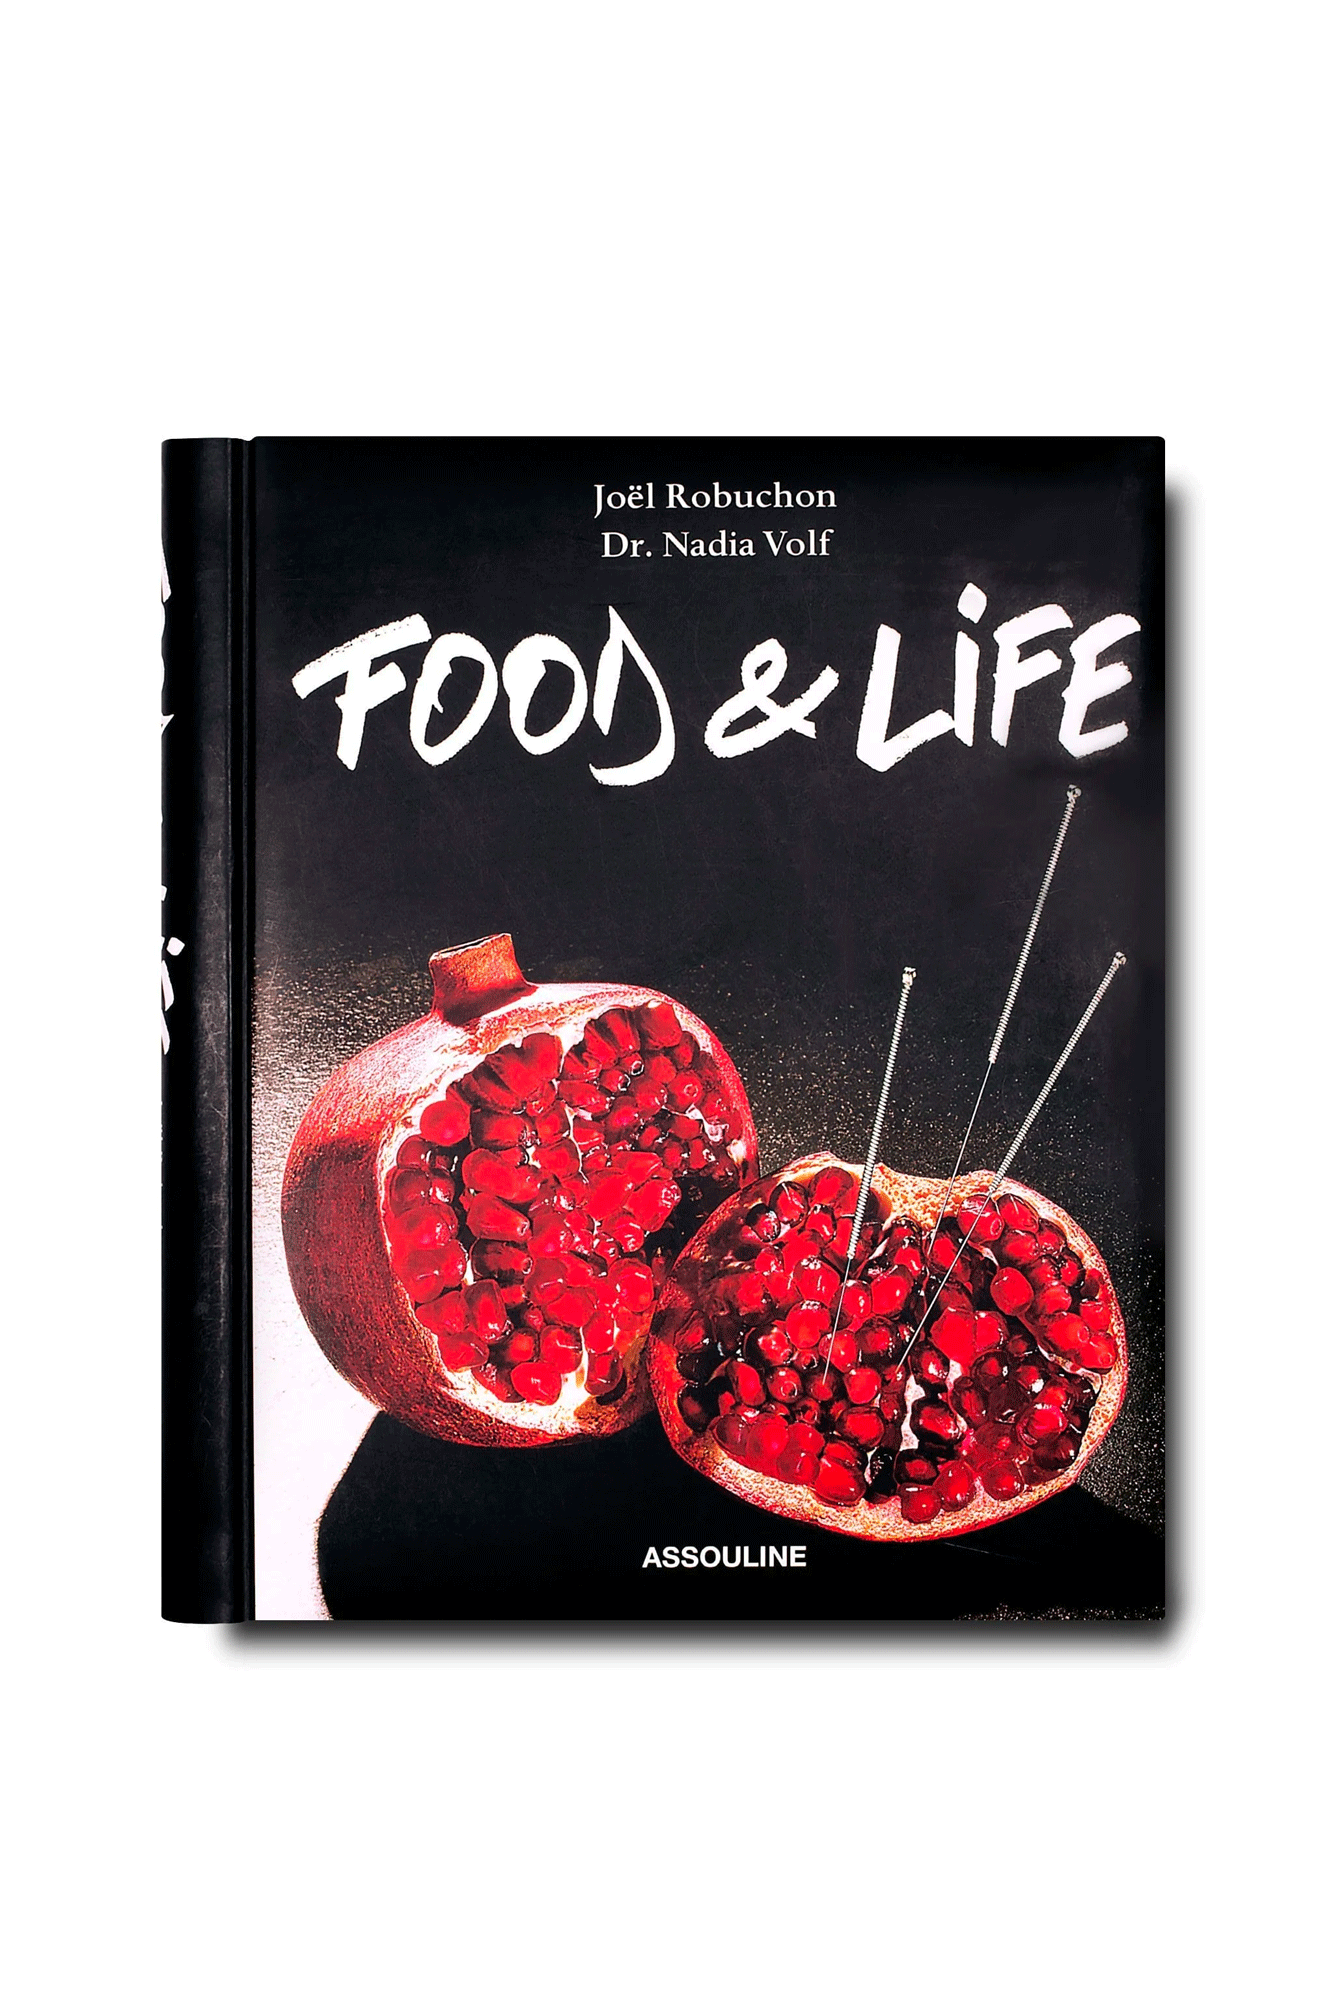 Food & Life from Assouline is the perfect combination of cooking and nutrition. With over 150 delicious gourmet recipes and insight into the nutritional benefits of each ingredient, you can truly enjoy food as part of a balanced and healthy lifestyle. Experience the joy of cooking with wholesome and natural ingredients, while gaining an understanding of the effects that food has on our bodies. Embrace the pleasure of living while improving your health.